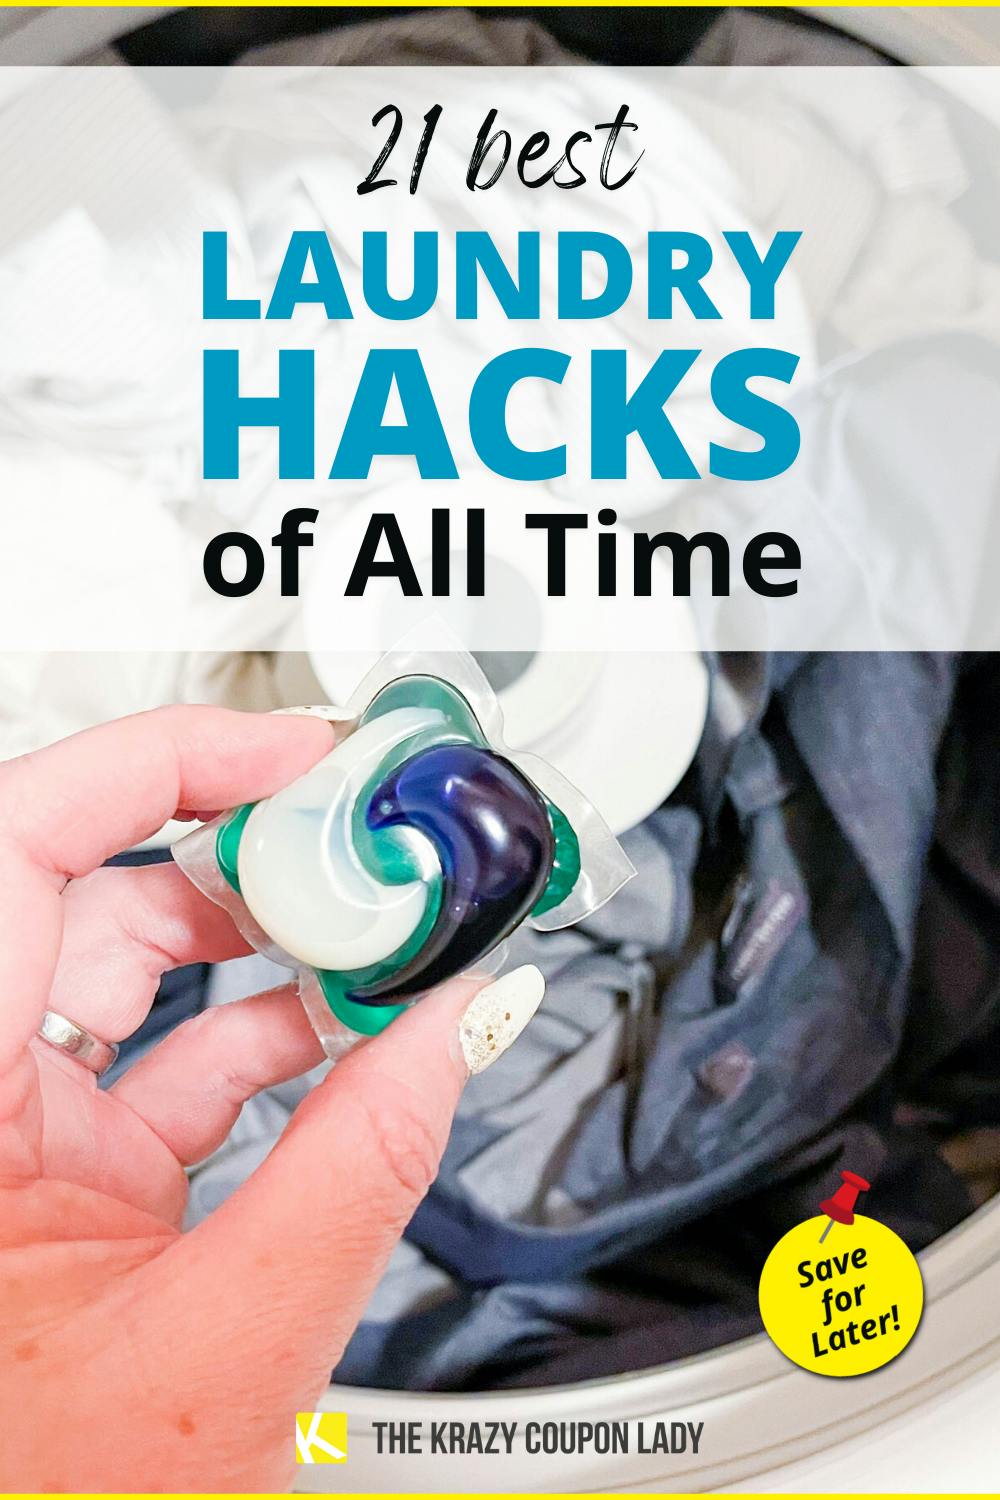 21 Best Laundry Hacks of All Time